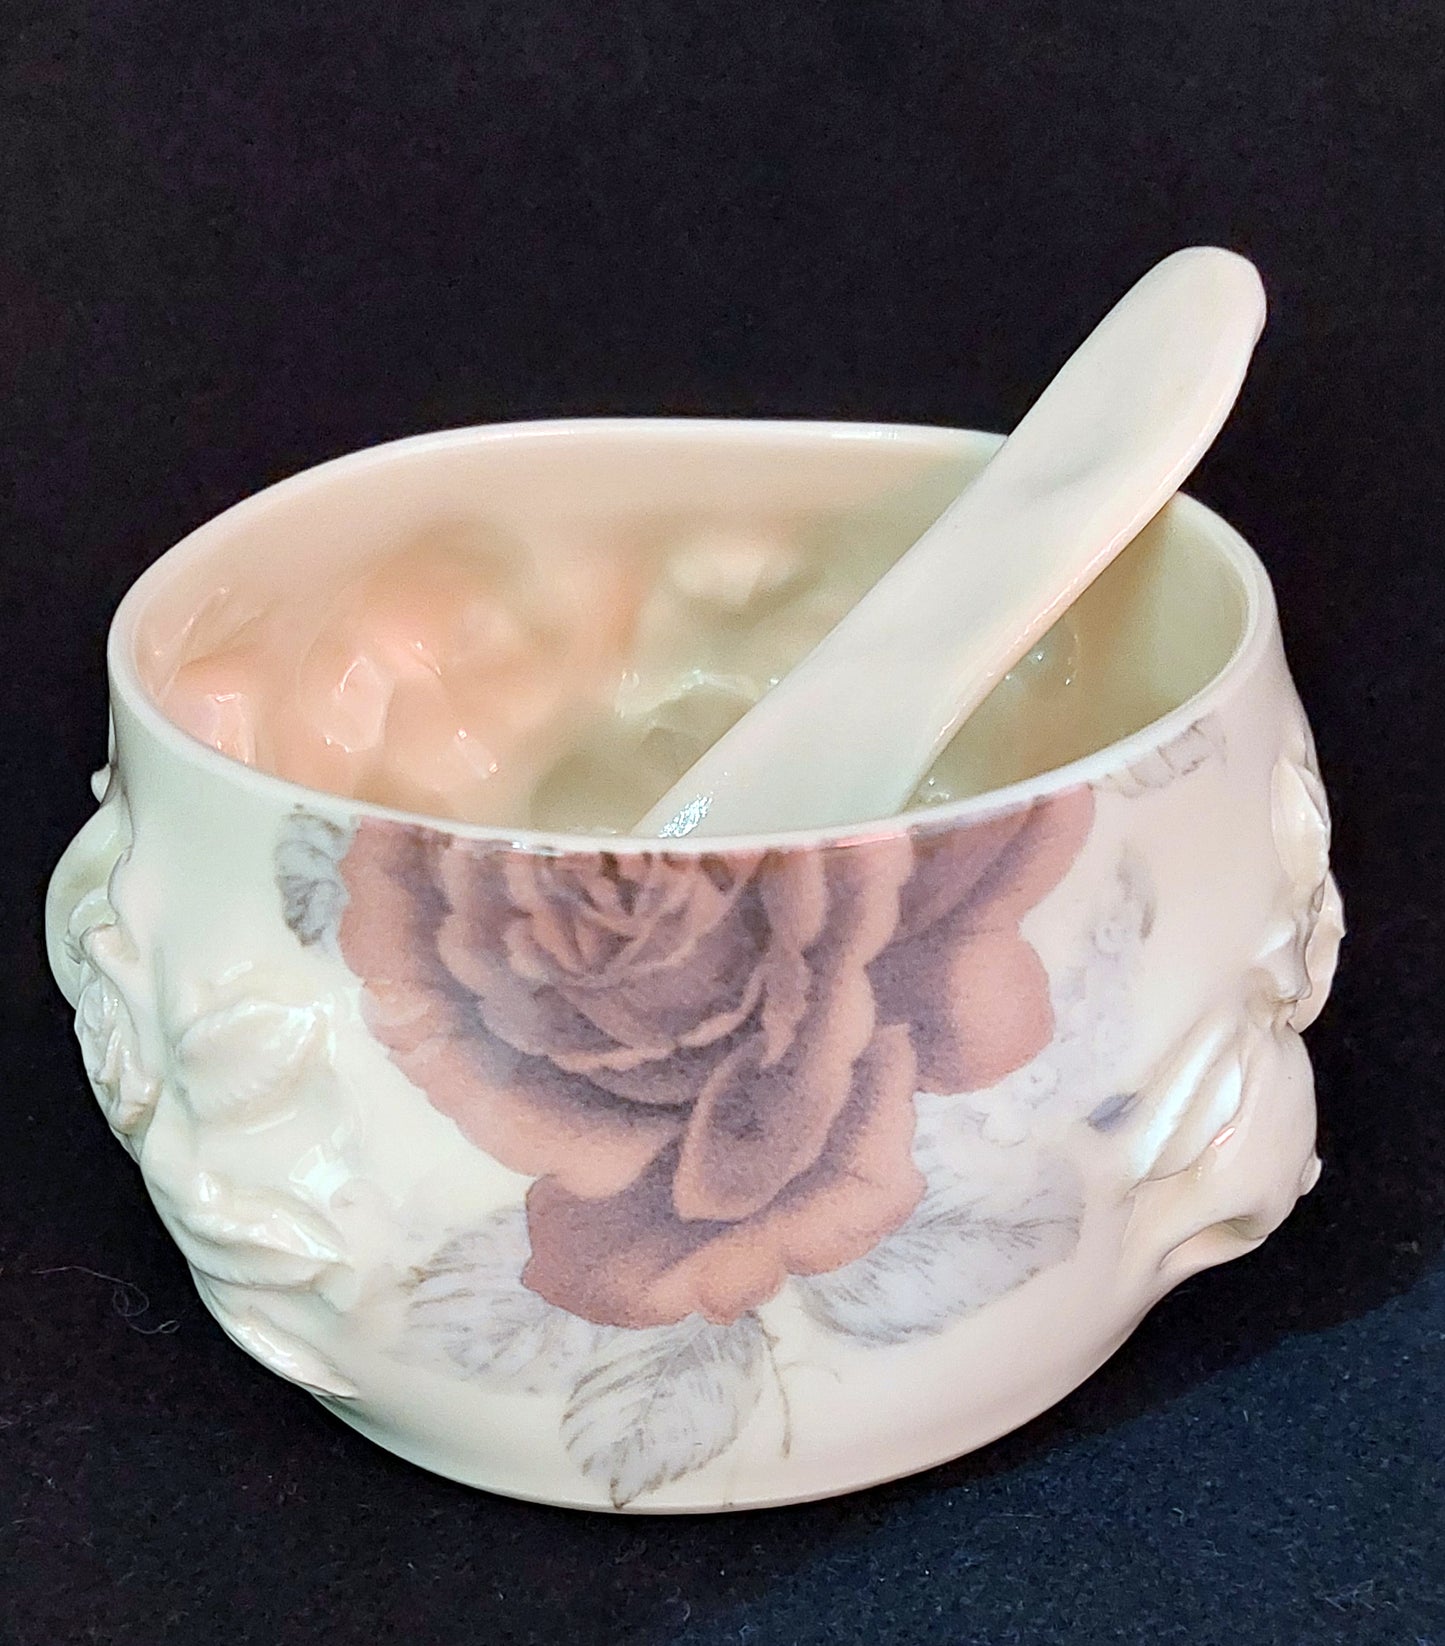 Skull and Rose Dish and Spoon